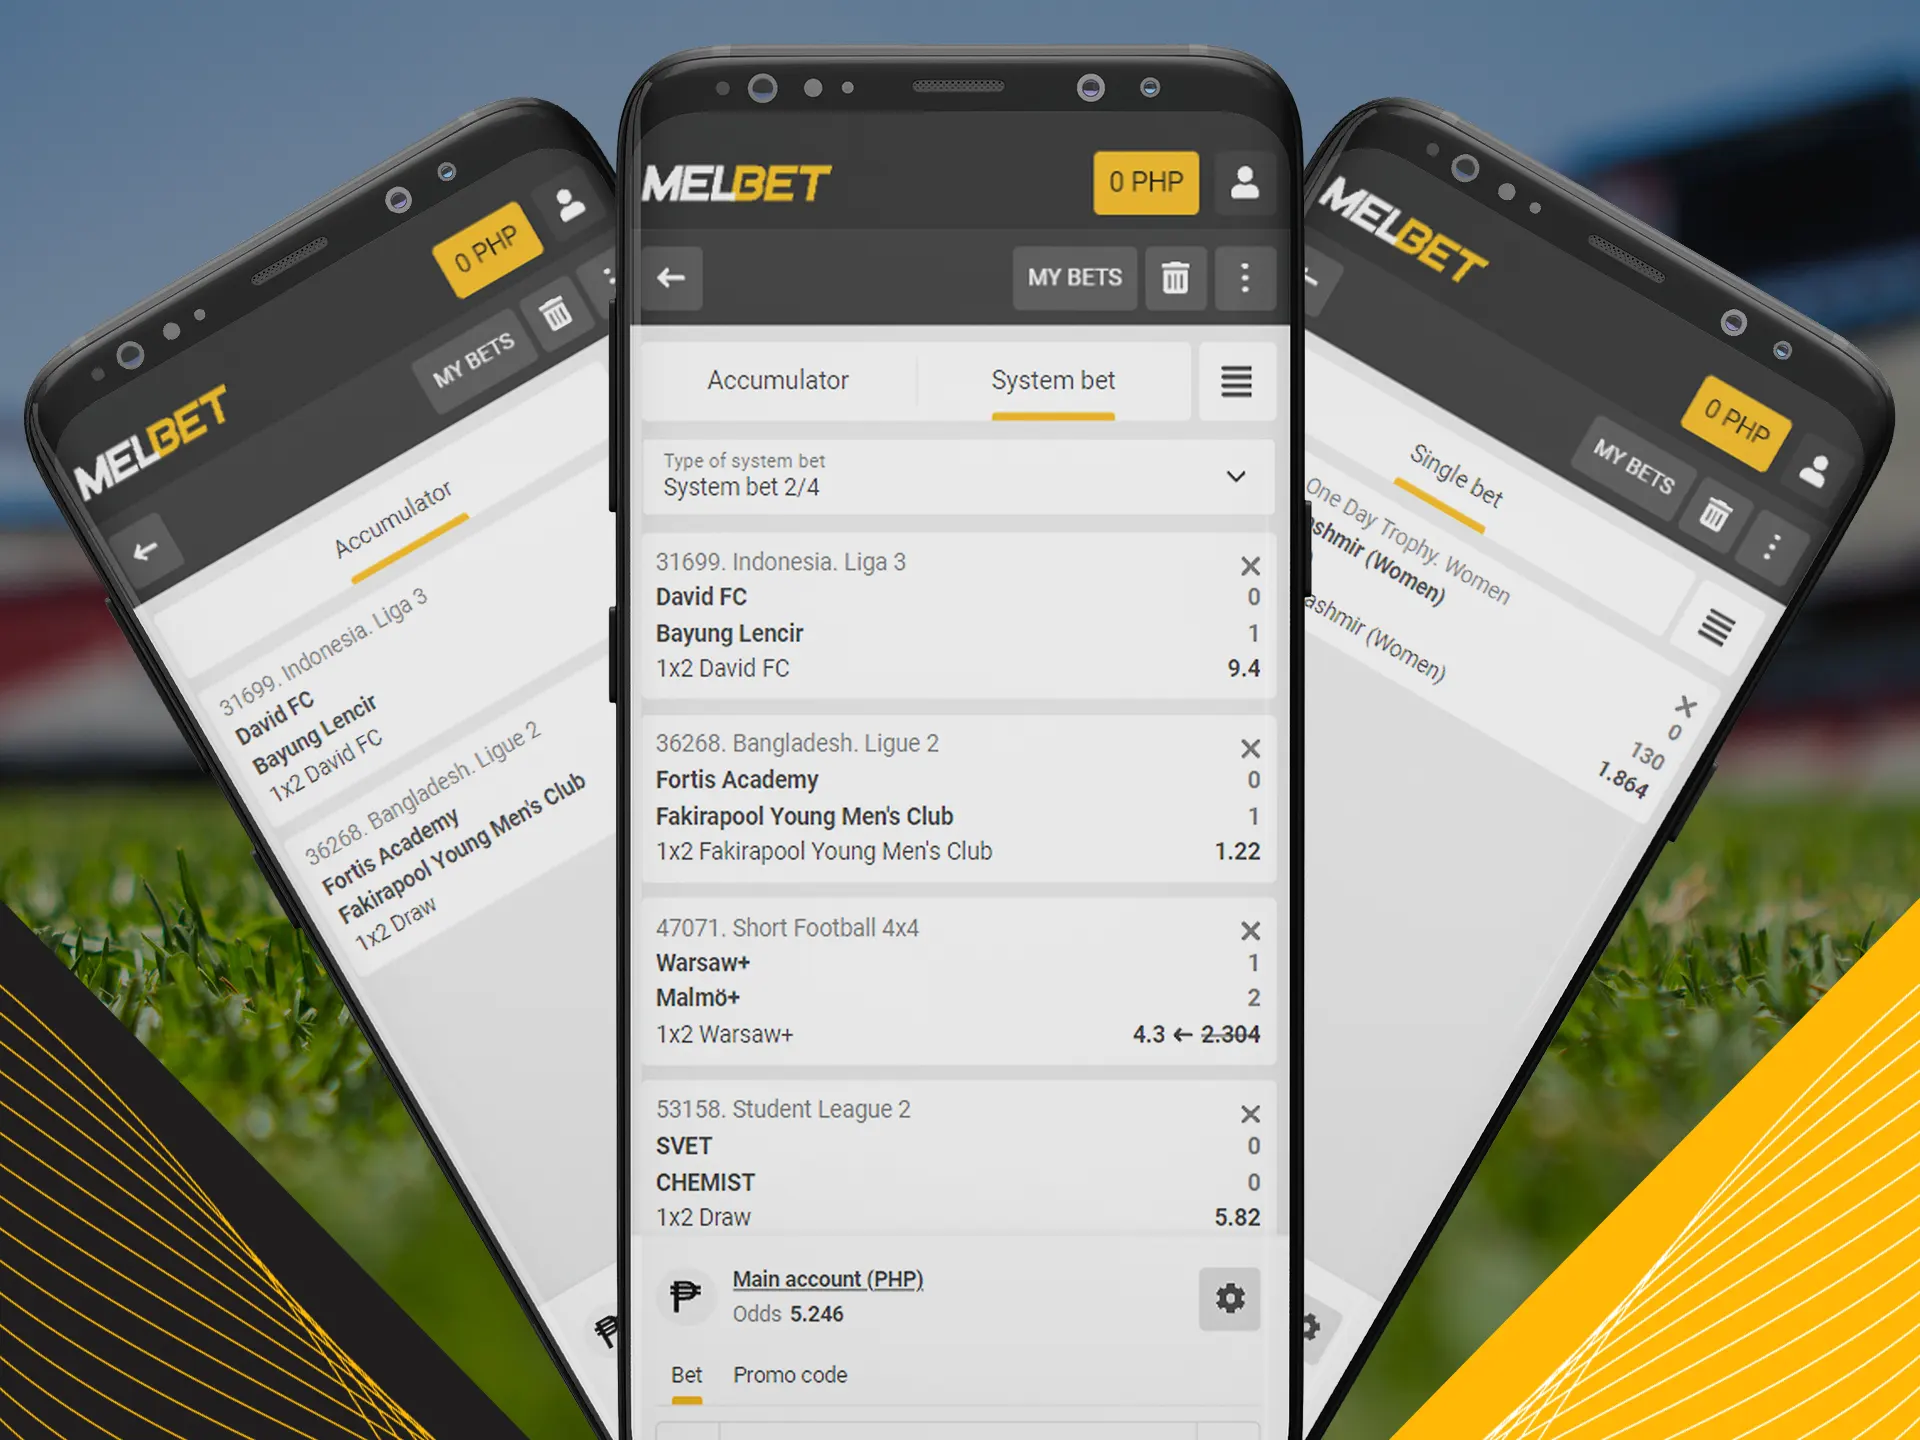 Make your own bet in Melbet app.